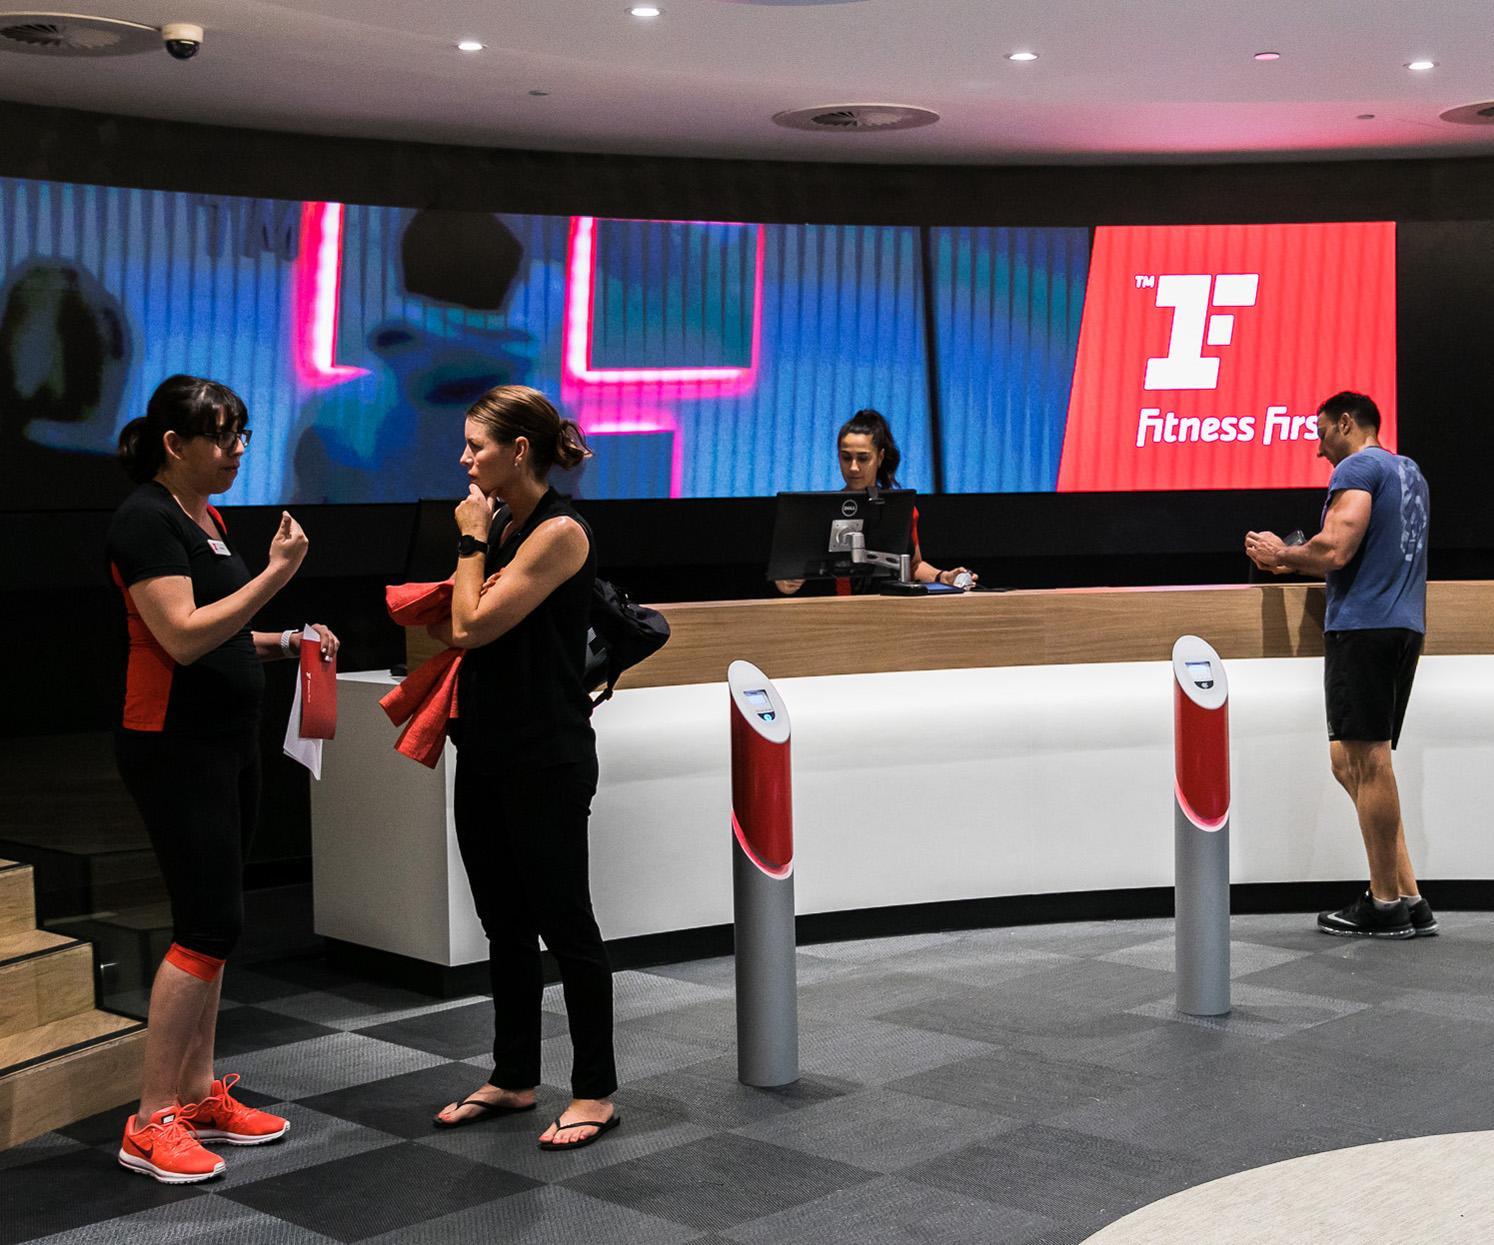 Fitness First Australia is one of the brands offering the paperless membership experience / FLG